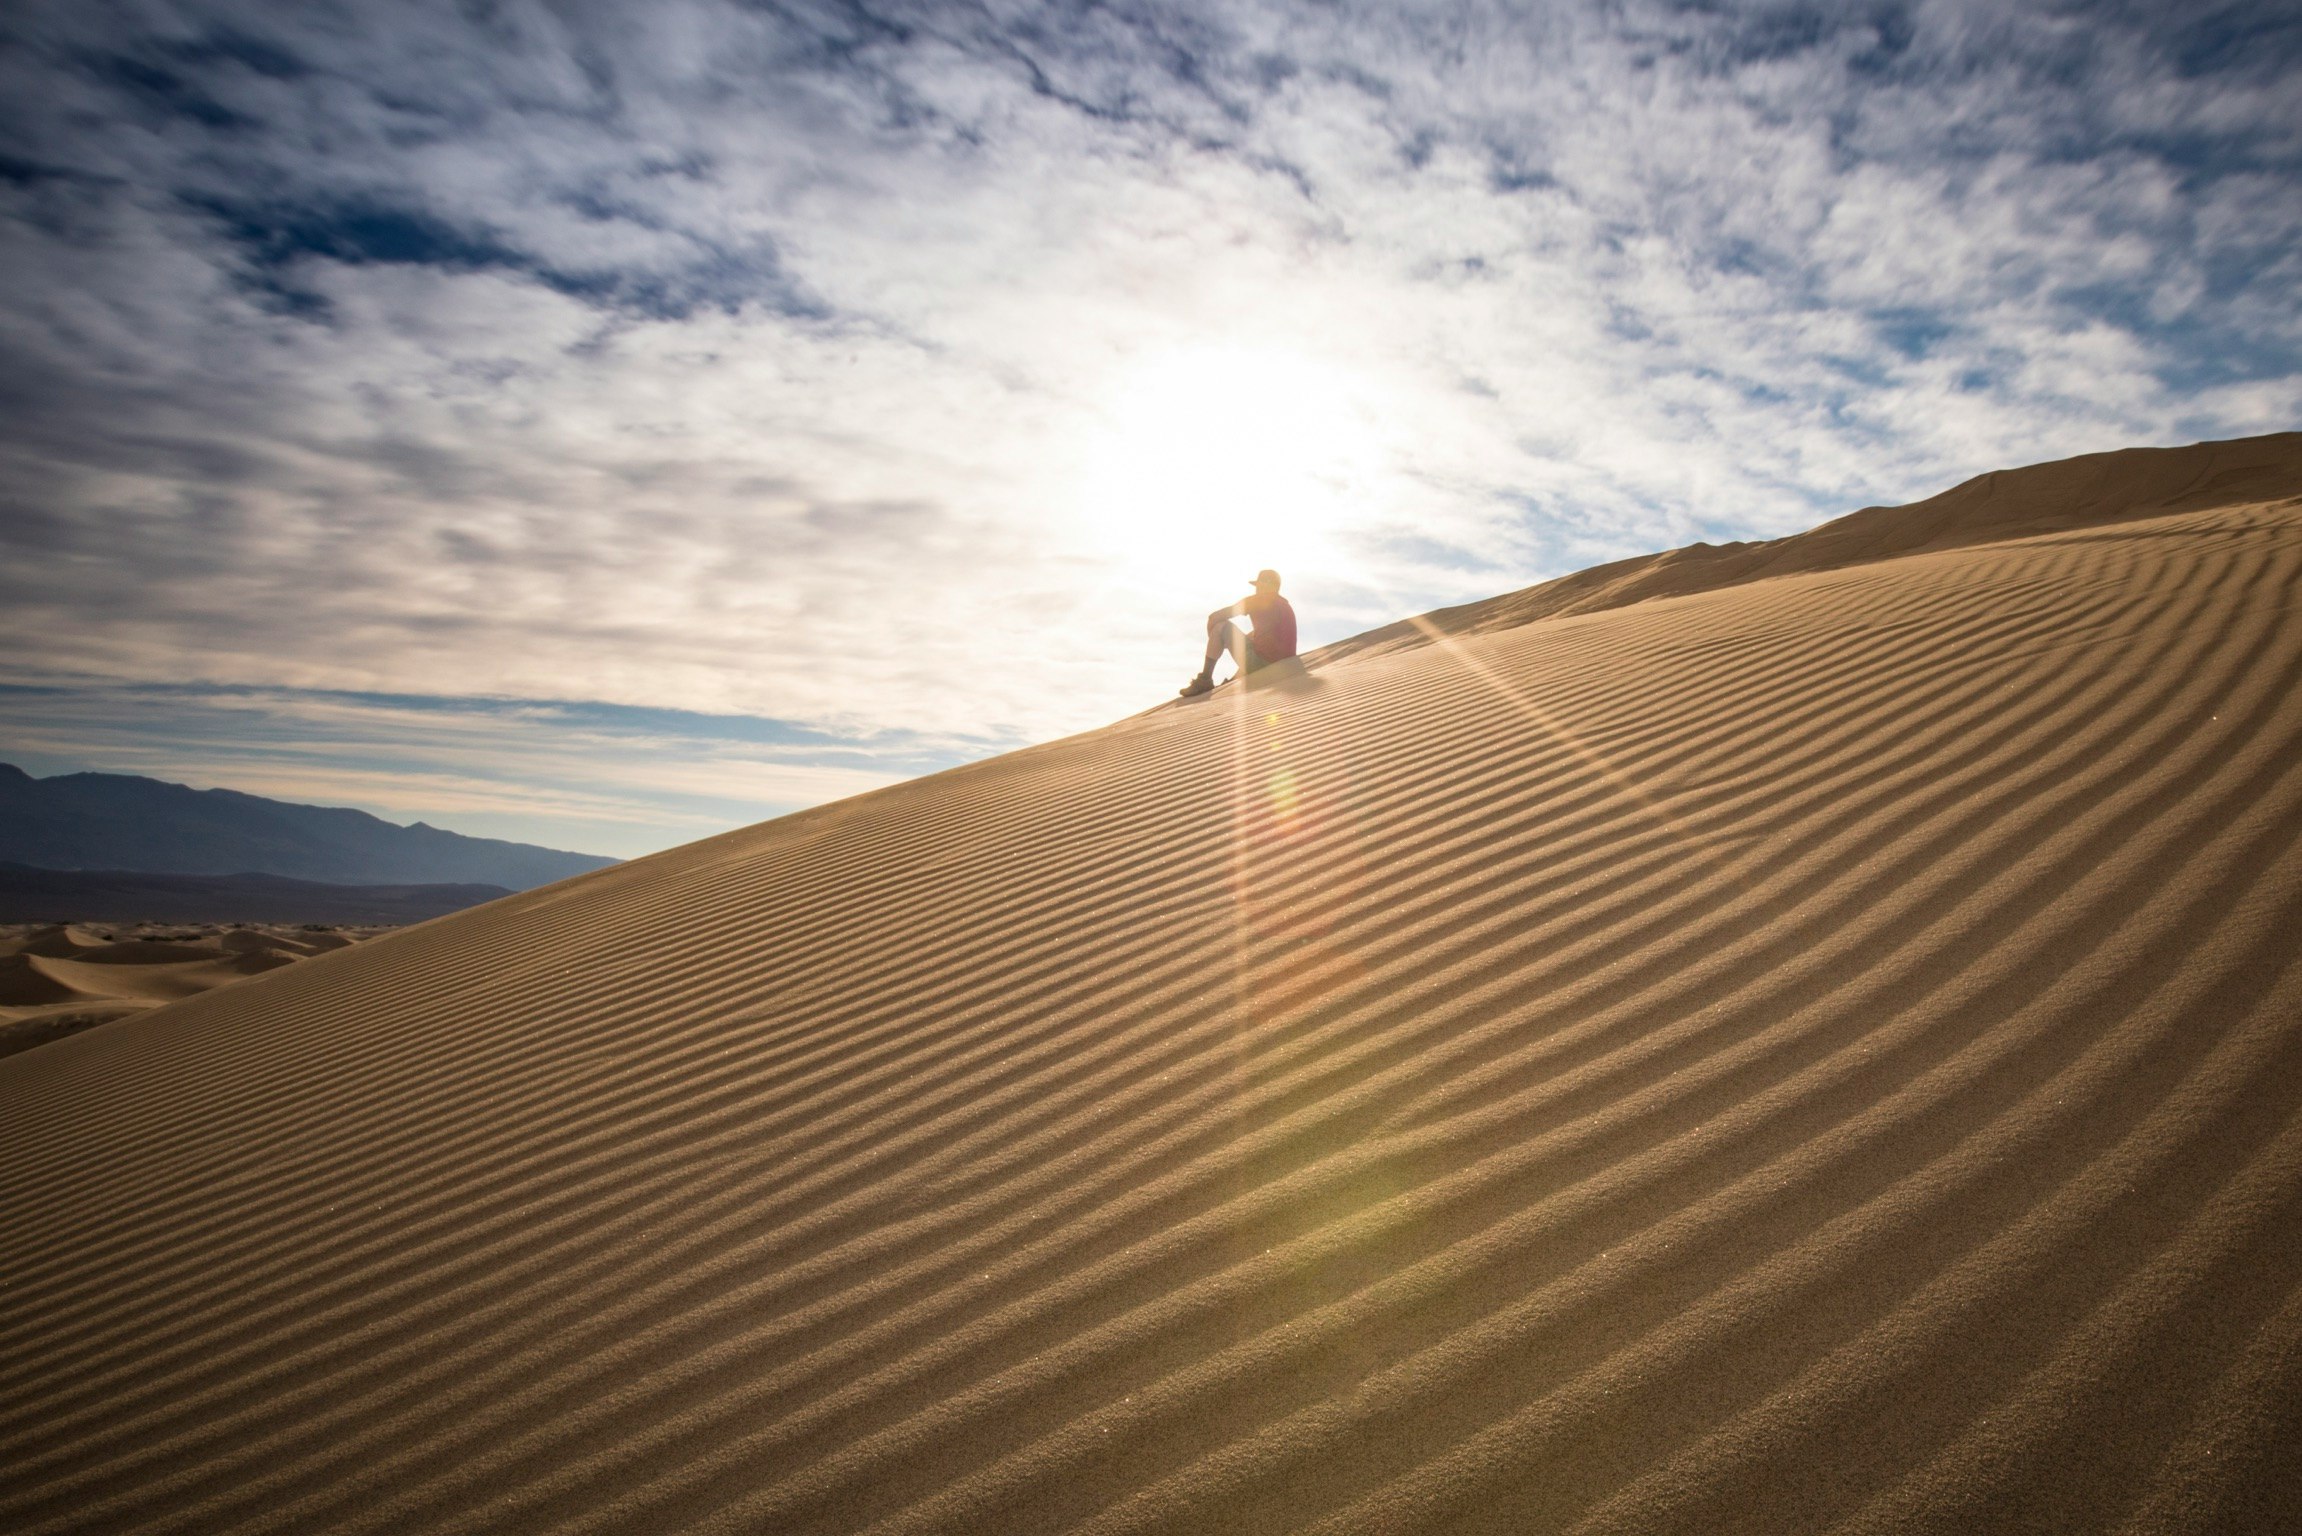 person in black jacket walking on desert under blue and white sunny cloudy sky during daytime